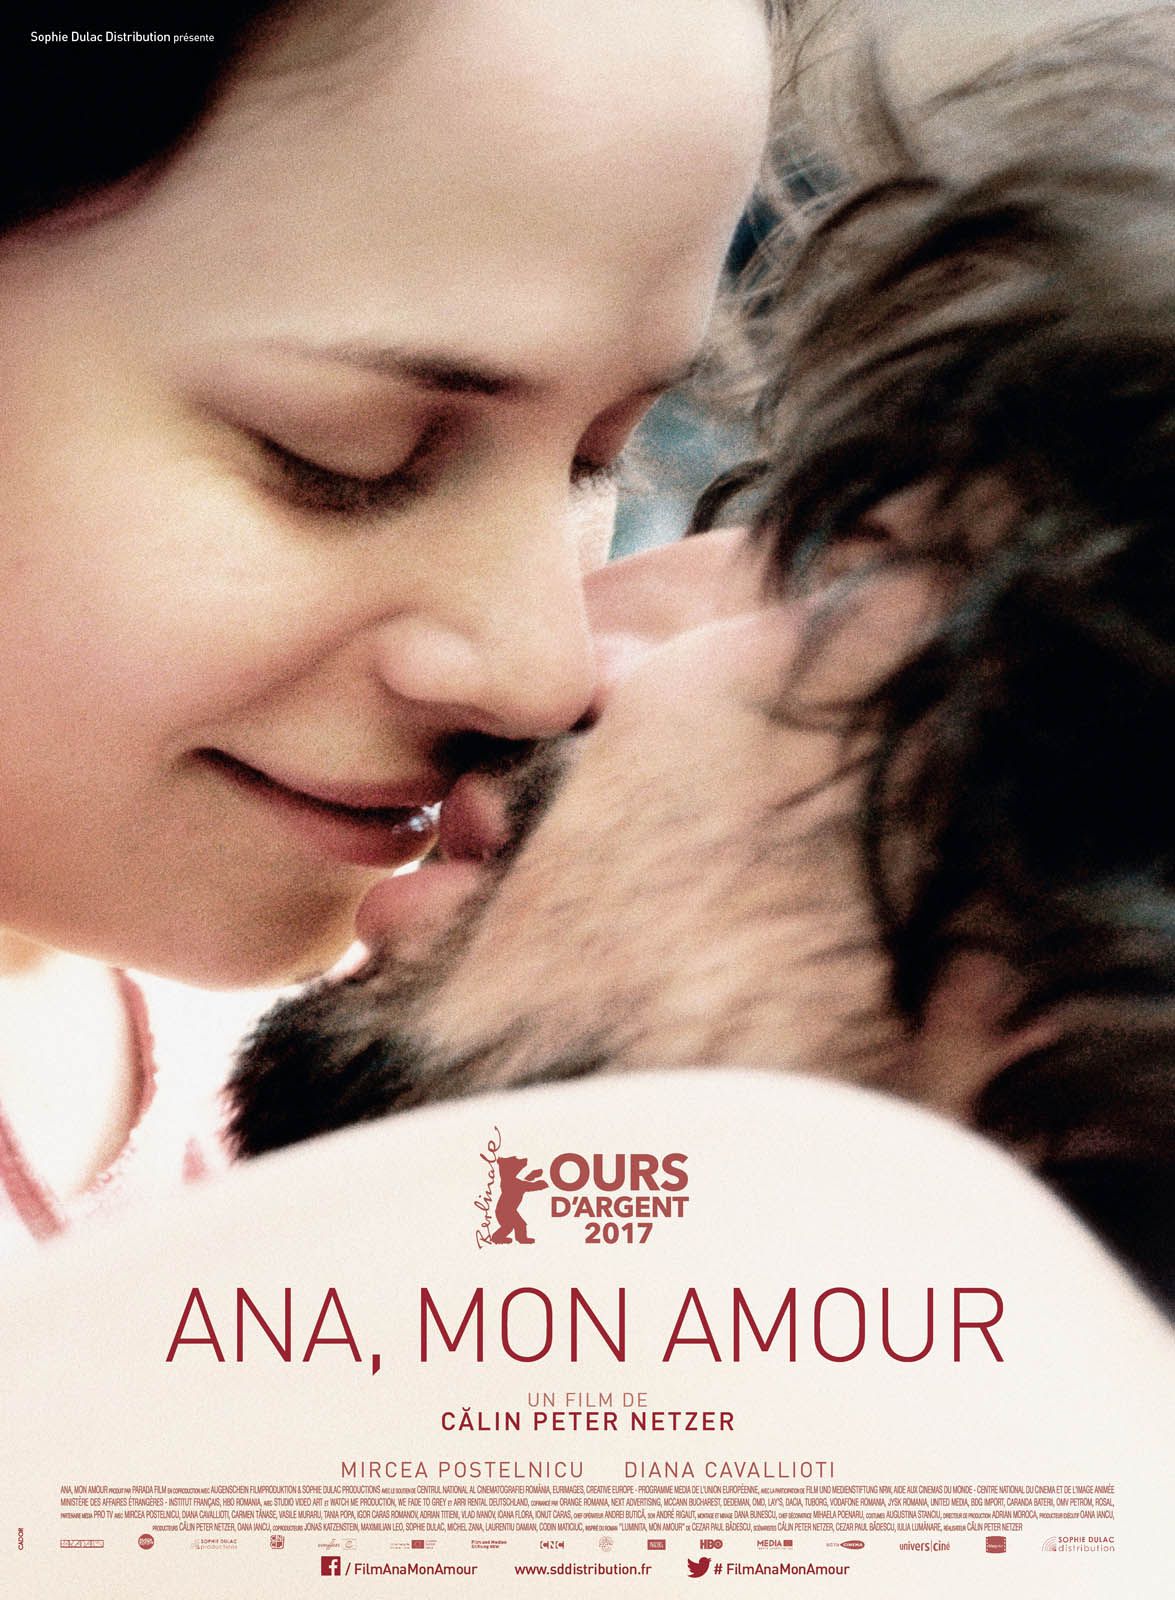 Ana, mon amour - Film (2017) streaming VF gratuit complet